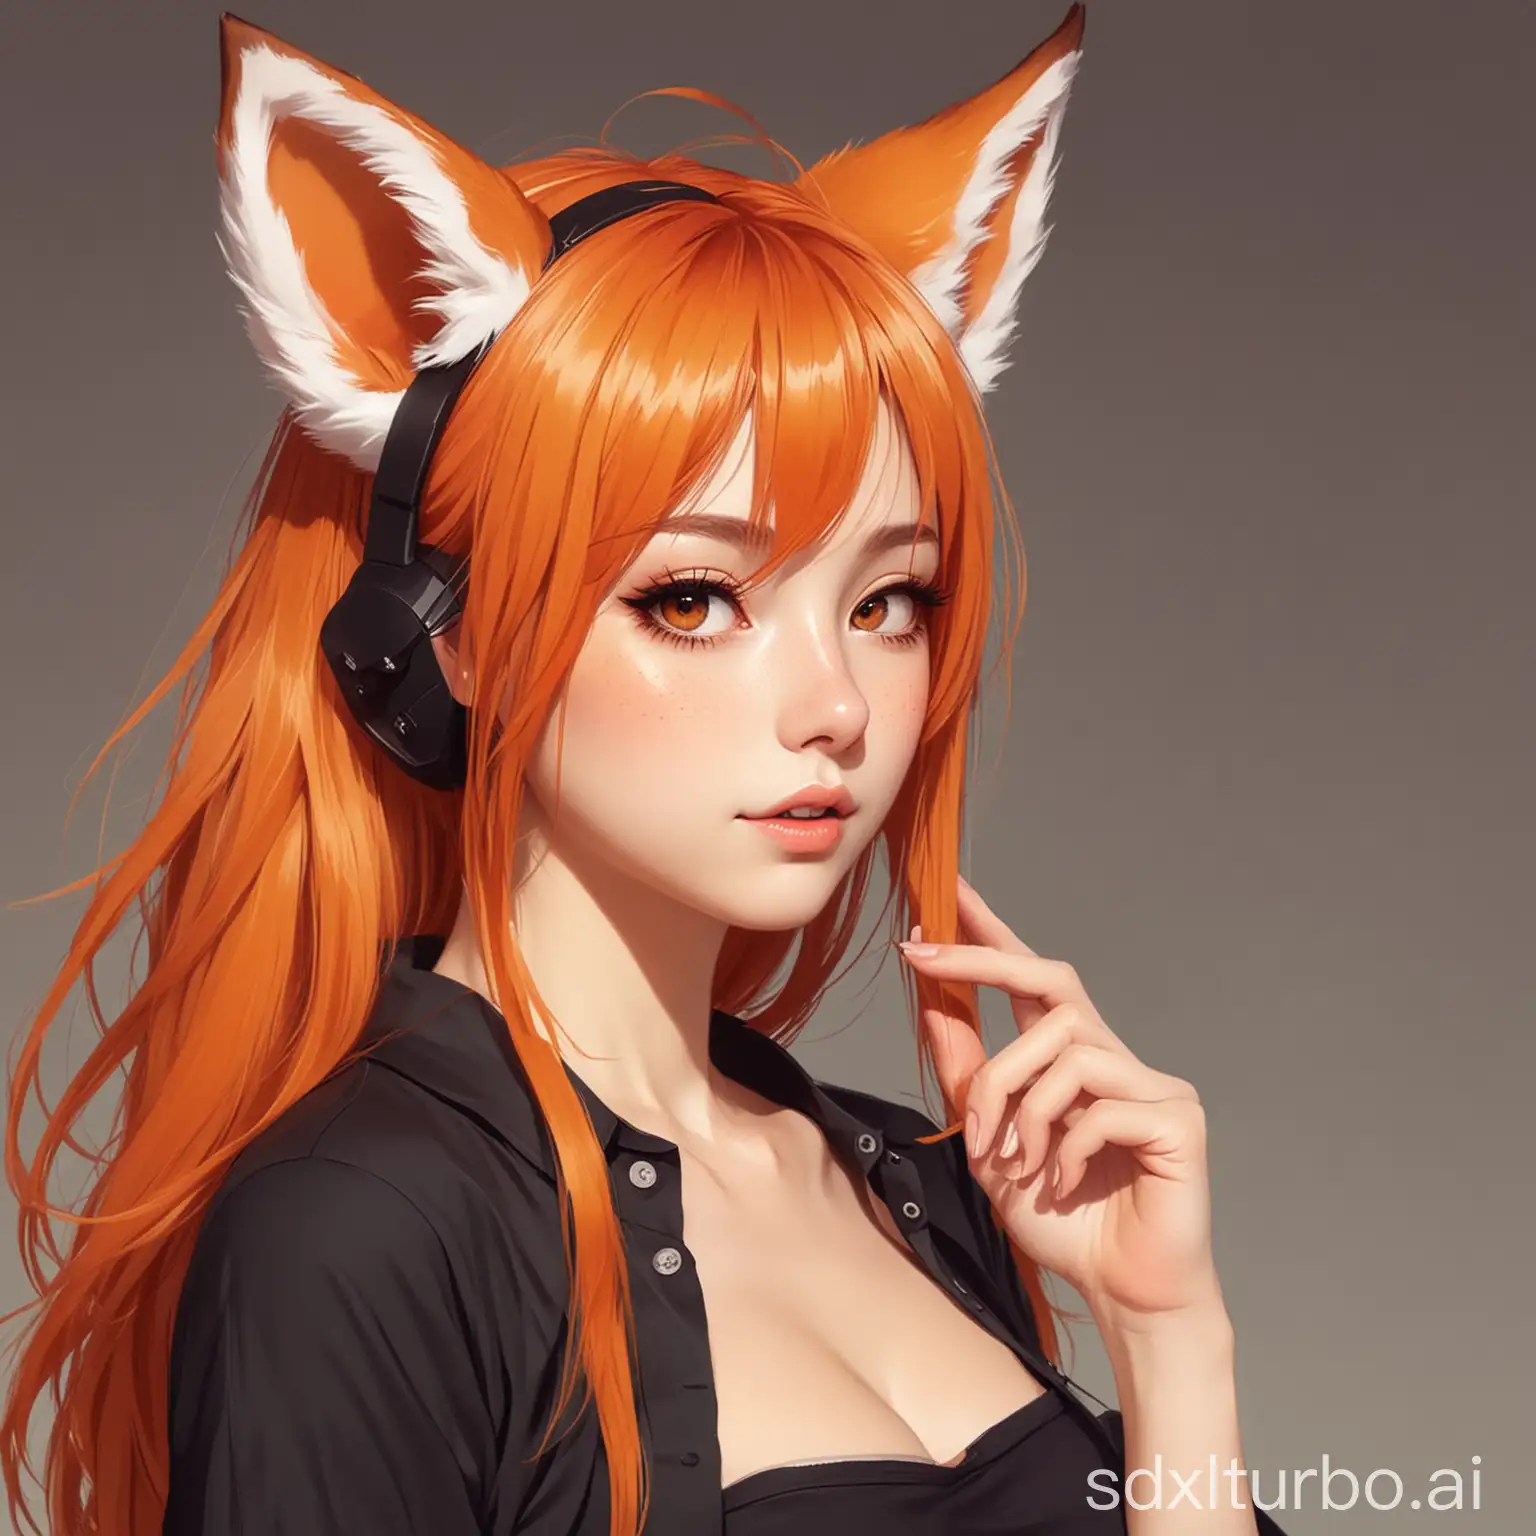 Anime-Woman-with-Fox-Ears-and-Orange-Hair-Enigmatic-Artistry